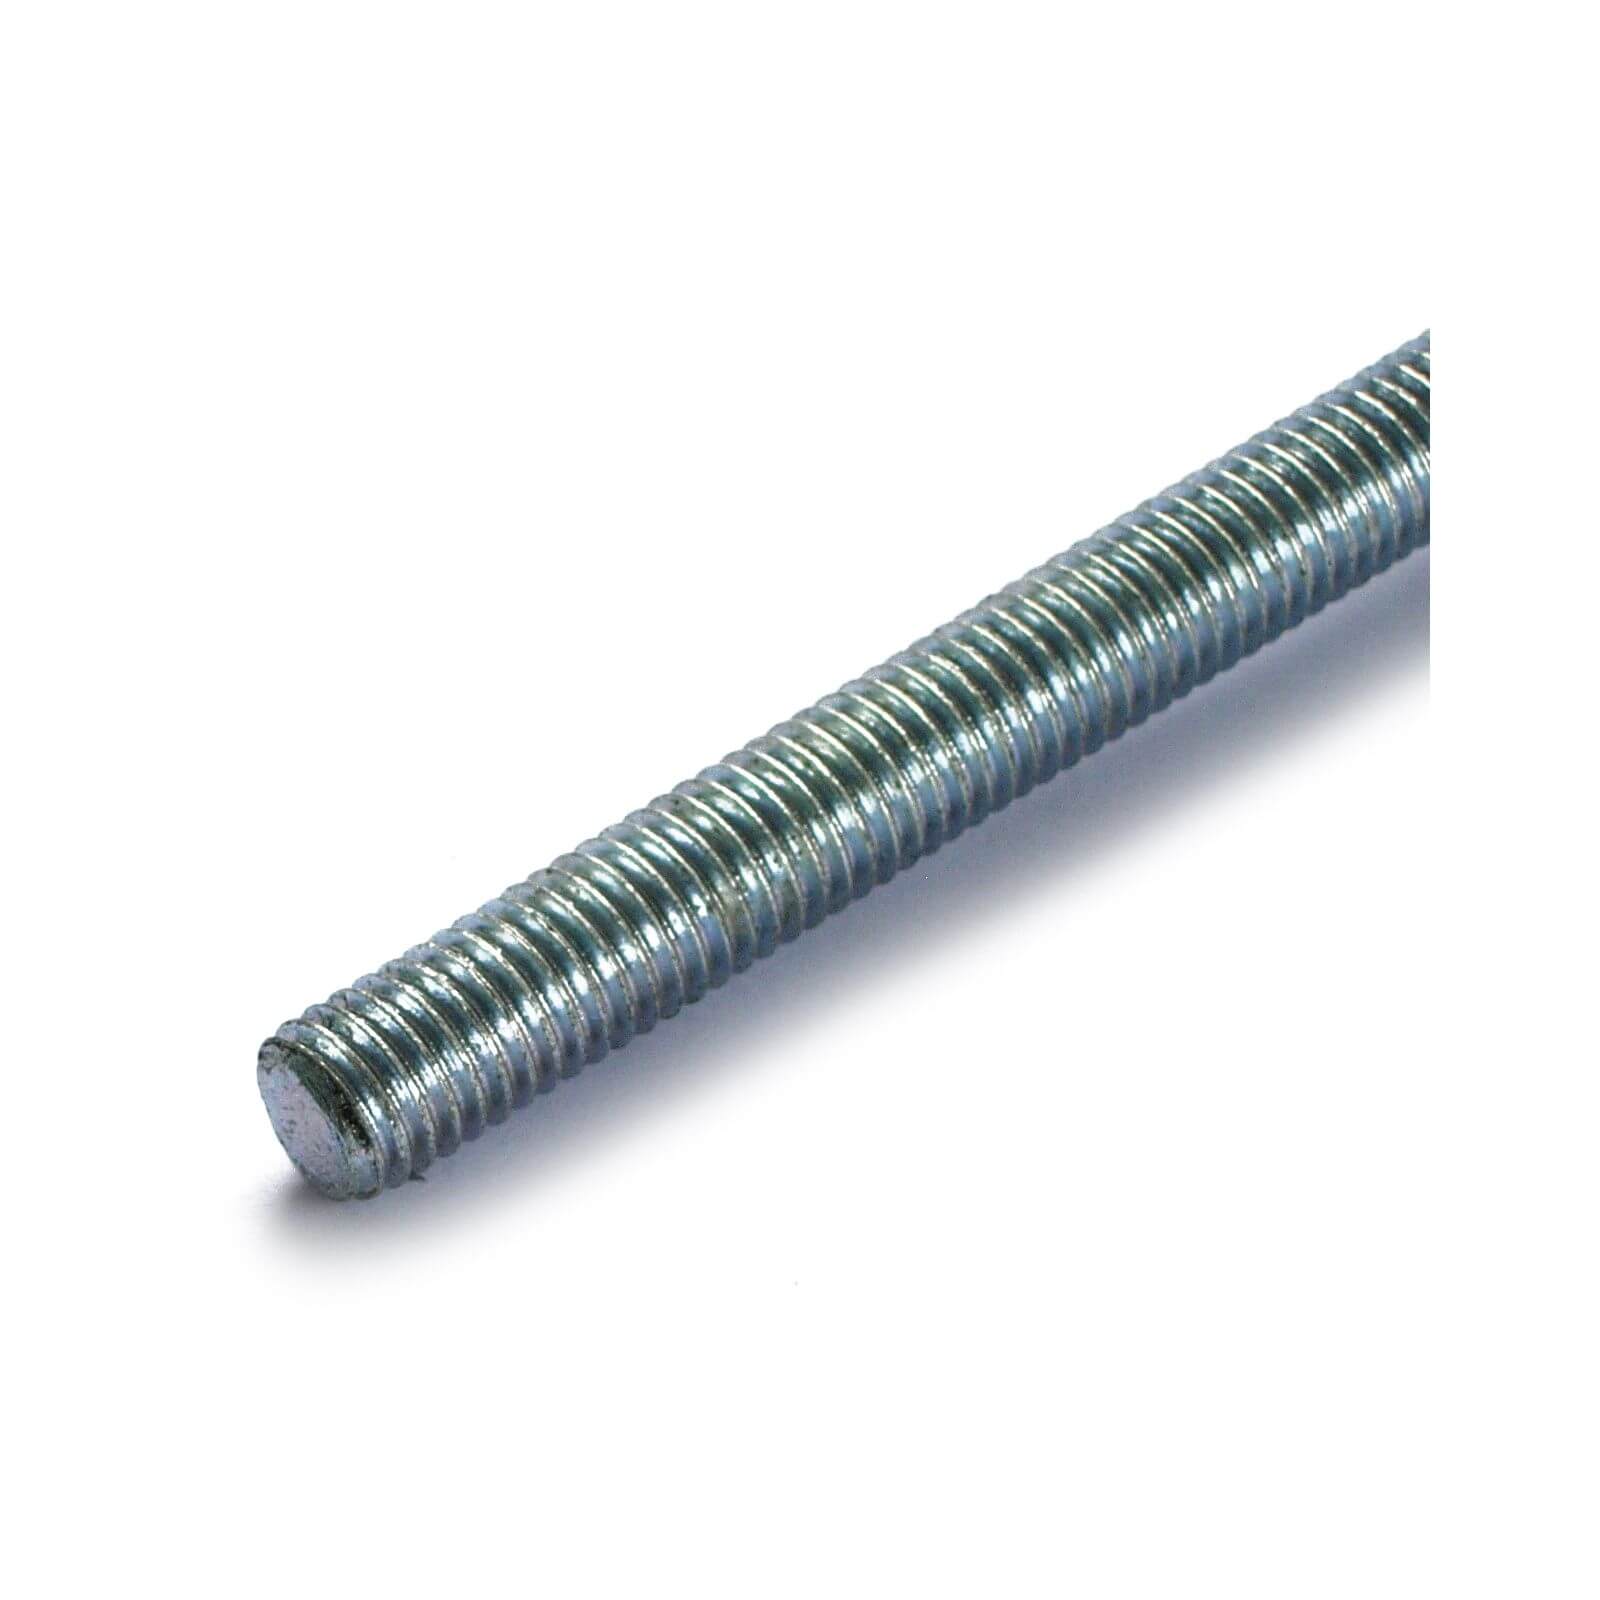 Threaded Rod (500mm) - Bright Zinc Plated - M10- 2 Pack